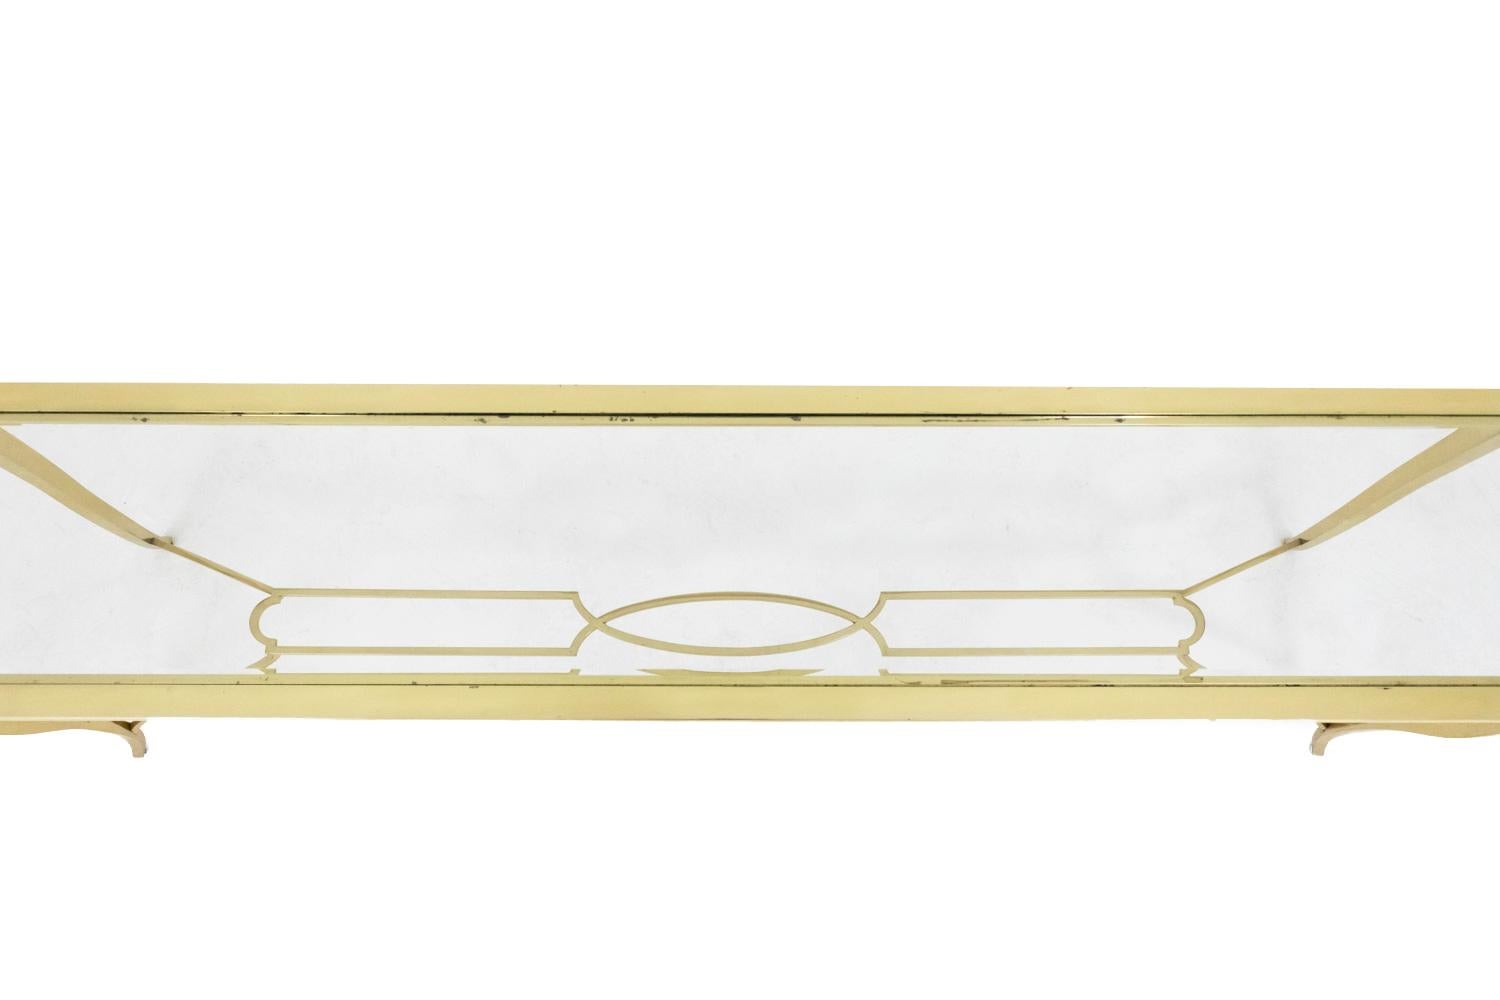 Large rectangular gilt brass console standing on four bulged legs linked each other by a tormented stretcher composed of oblong twisted medallions in the middle part. 
Rectangular tray in transparent glass.

Work in the 1940s style, realized in